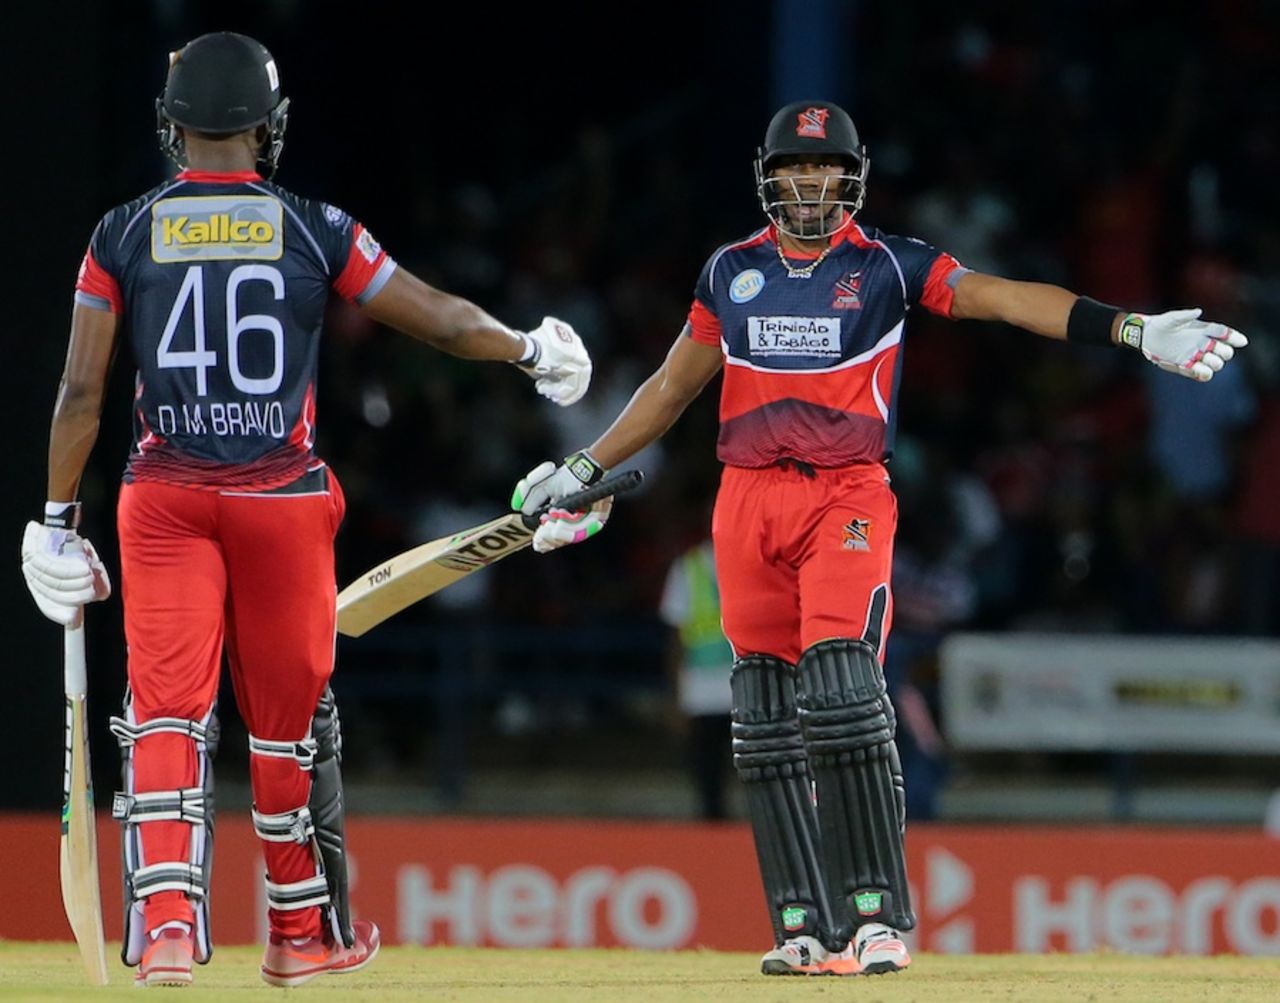 Darren and Dwayne Bravo added 59 runs in 2.4 overs, Trinidad & Tobago Red Steel v Barbados Tridents, CPL 2015, Port-of-Spain, July 16, 2015